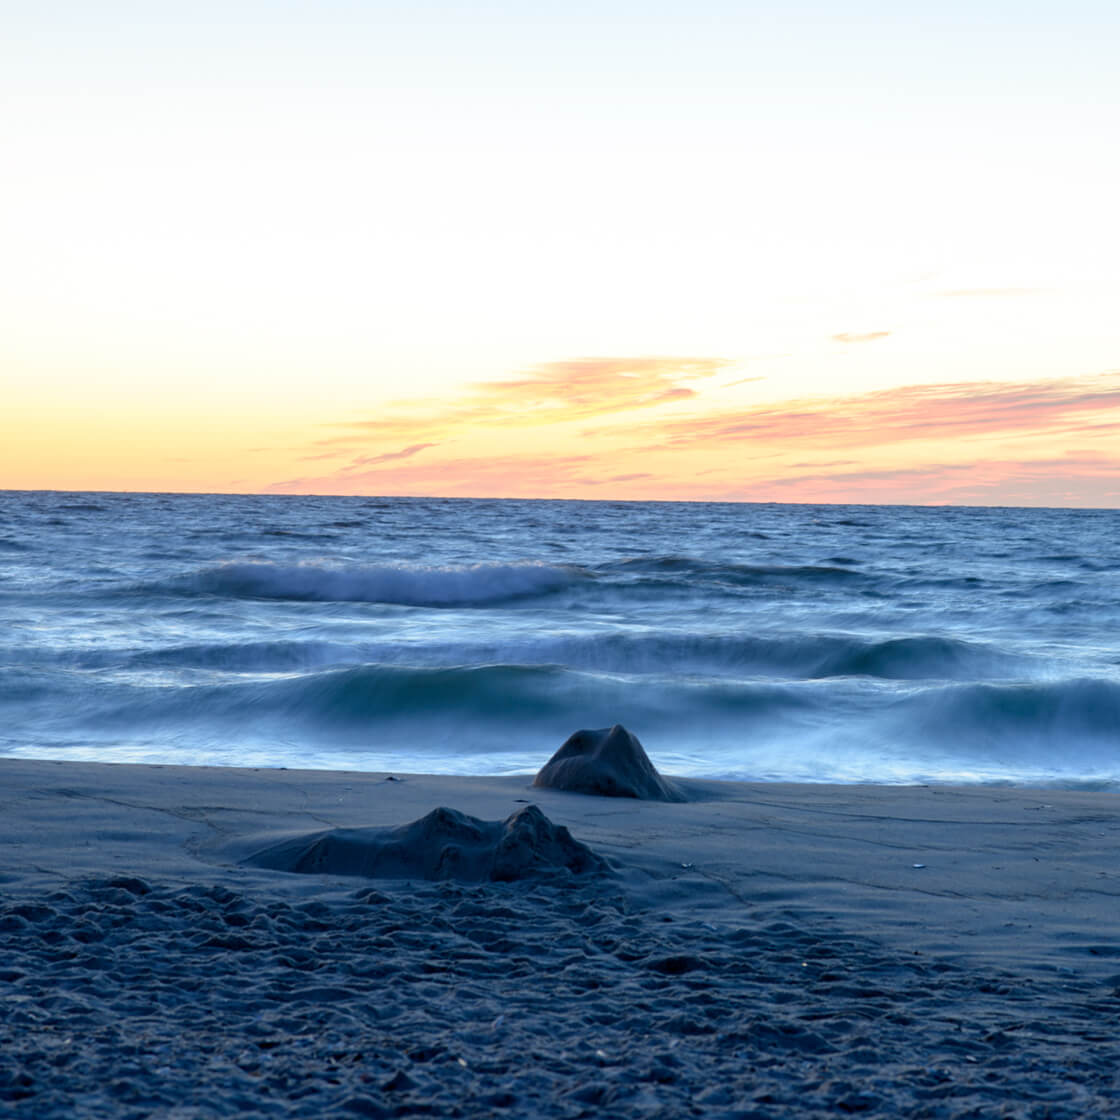 photo of a sunset, with mild waves crashing on a beach